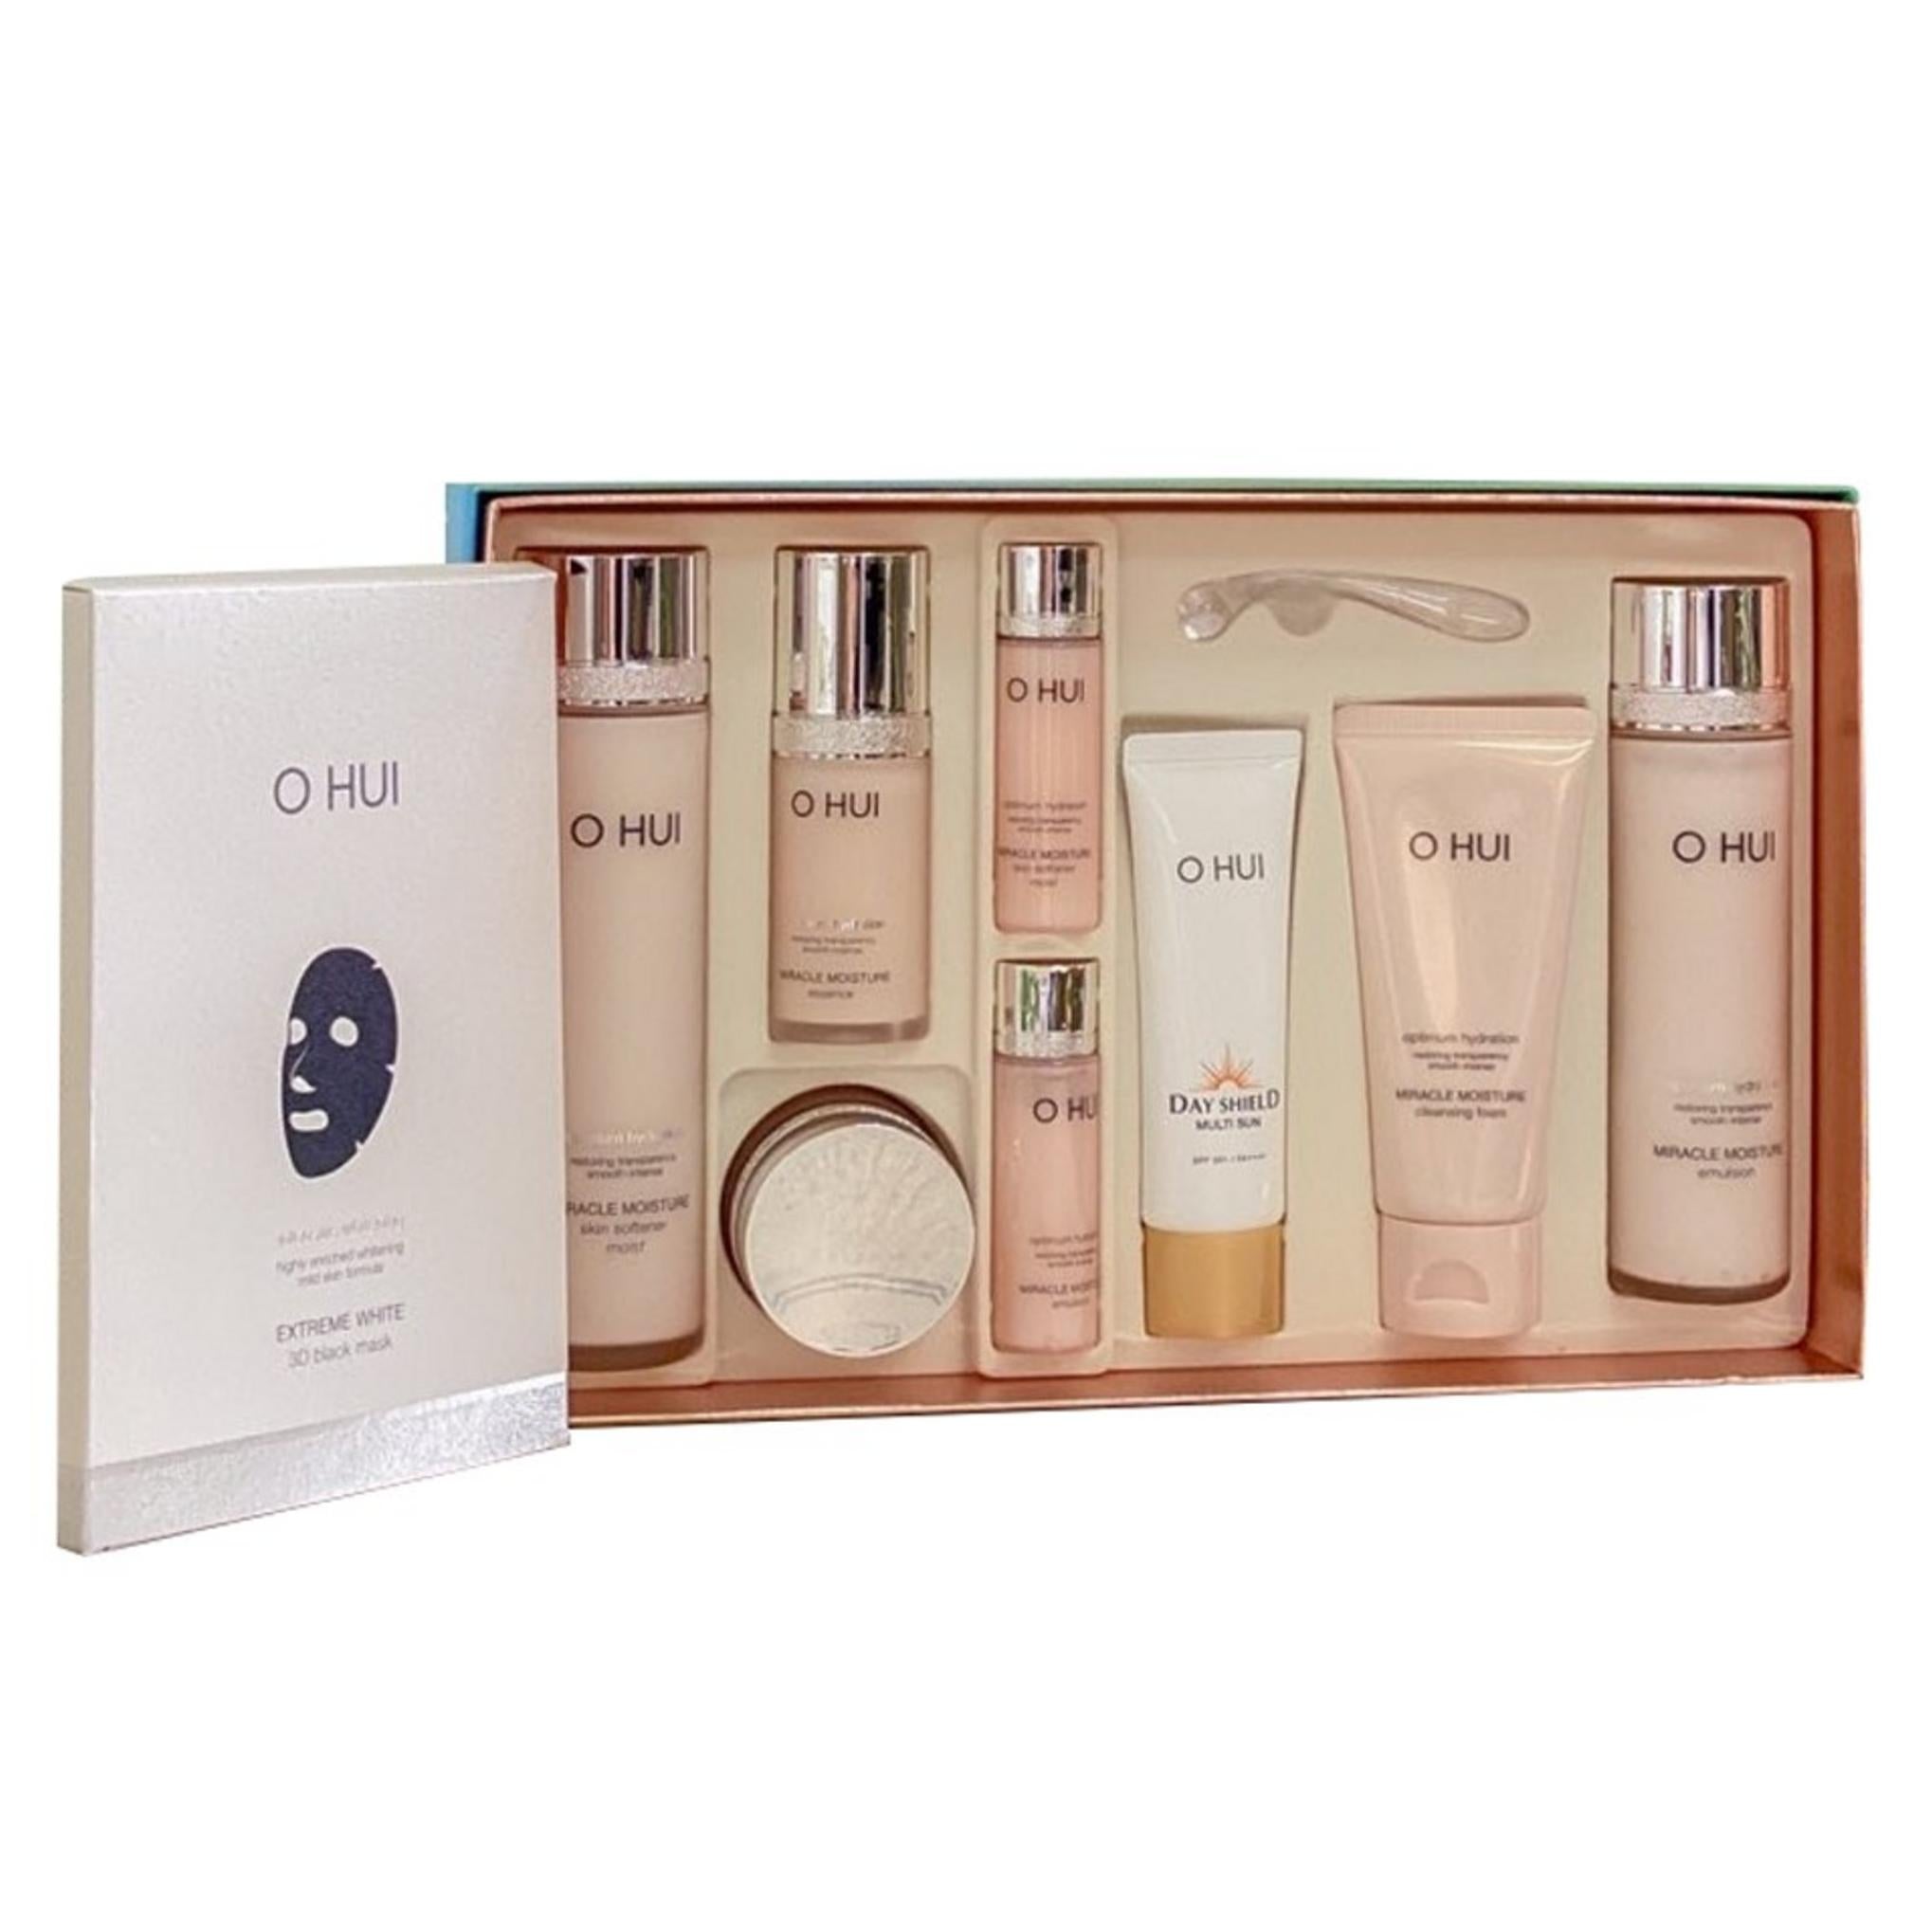 O HUI Miracle Moisture Special Set of 4